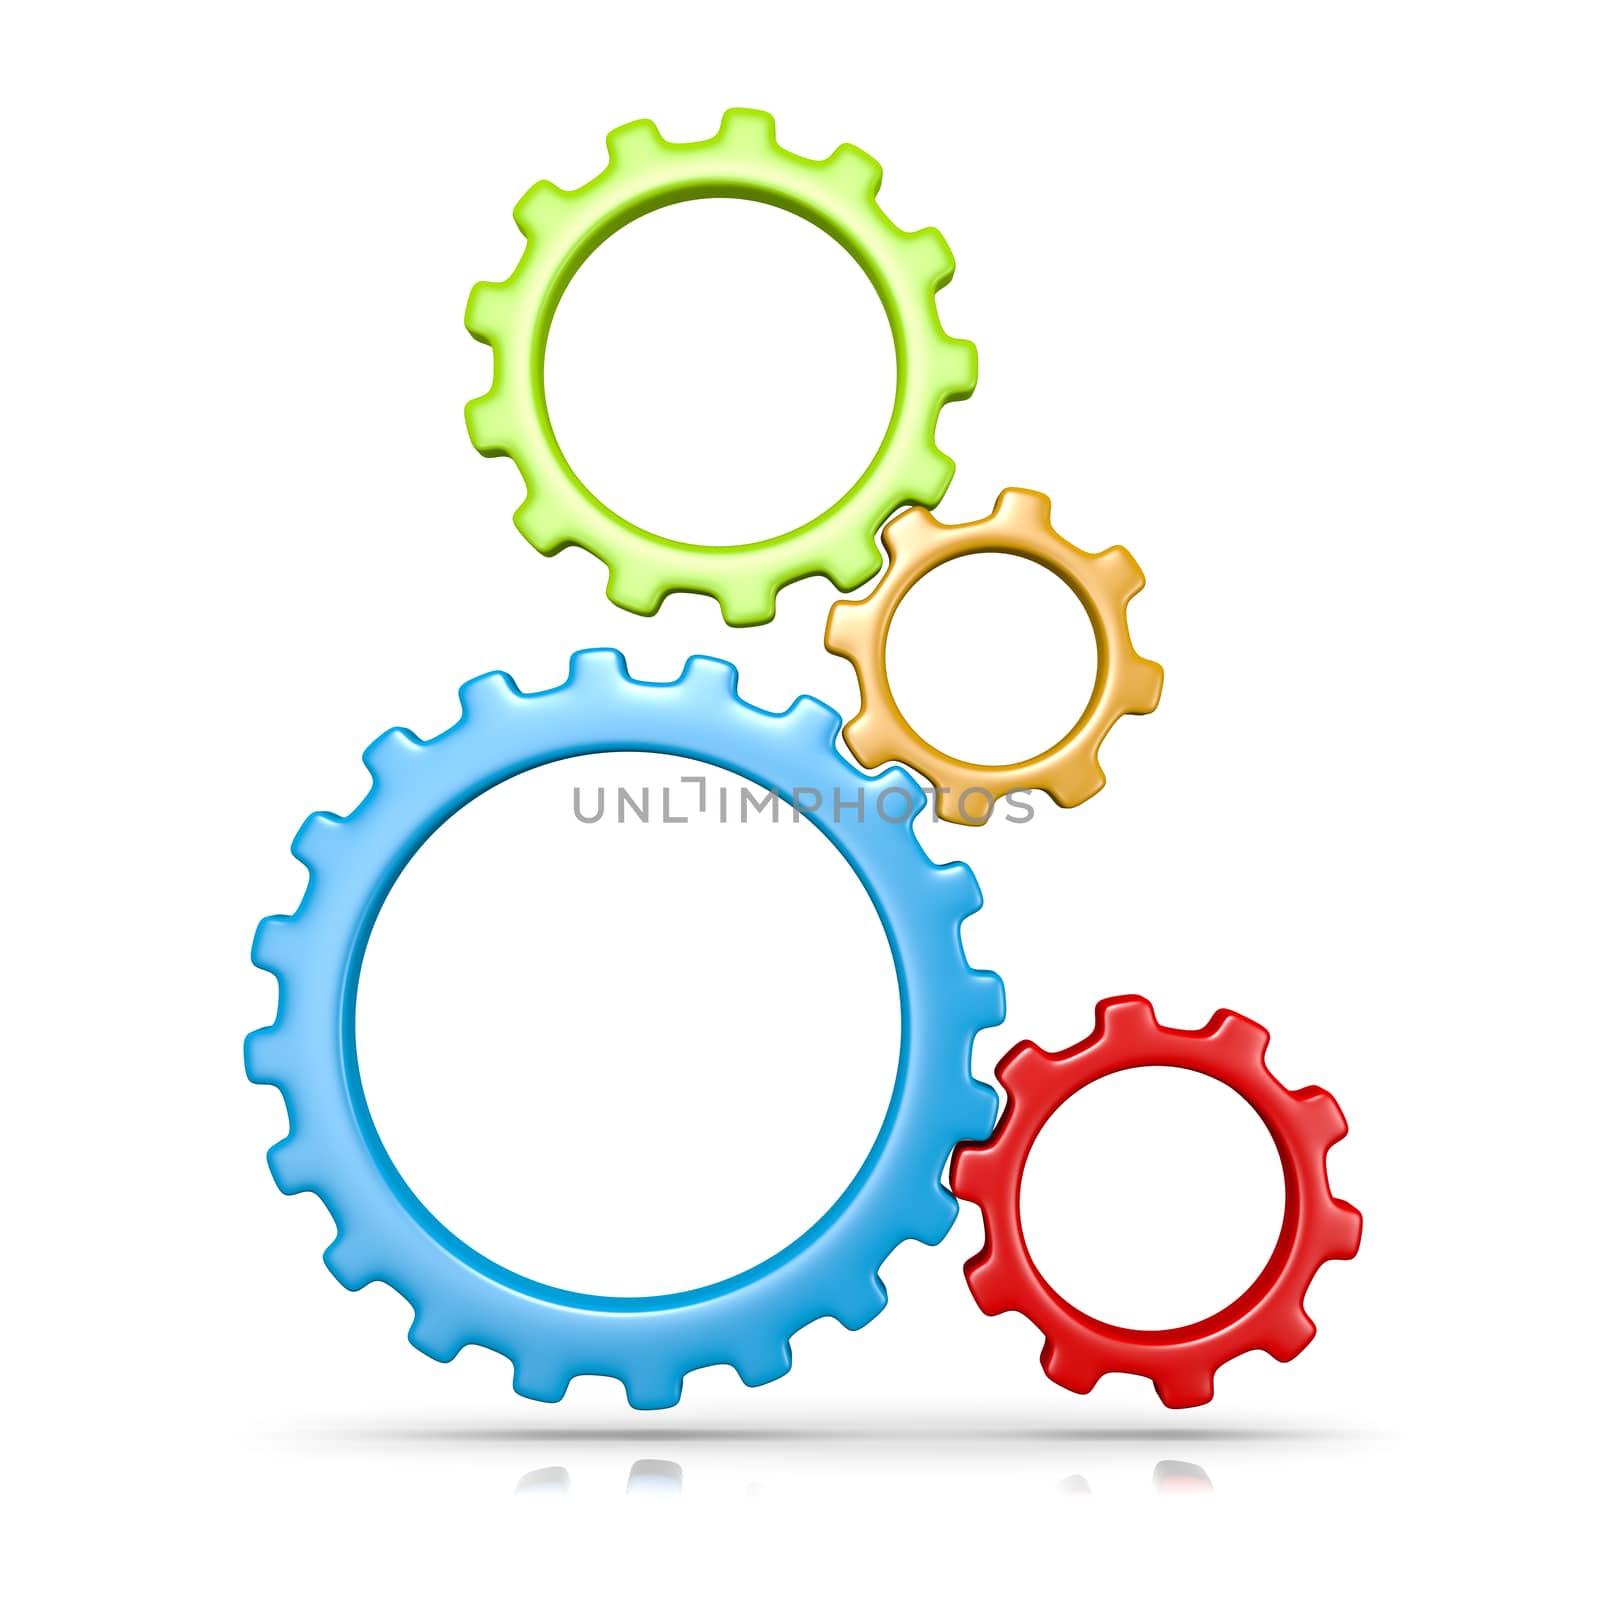 Four Plastic Colorful Gears Engaged 3D Illustration Isolated on White Background